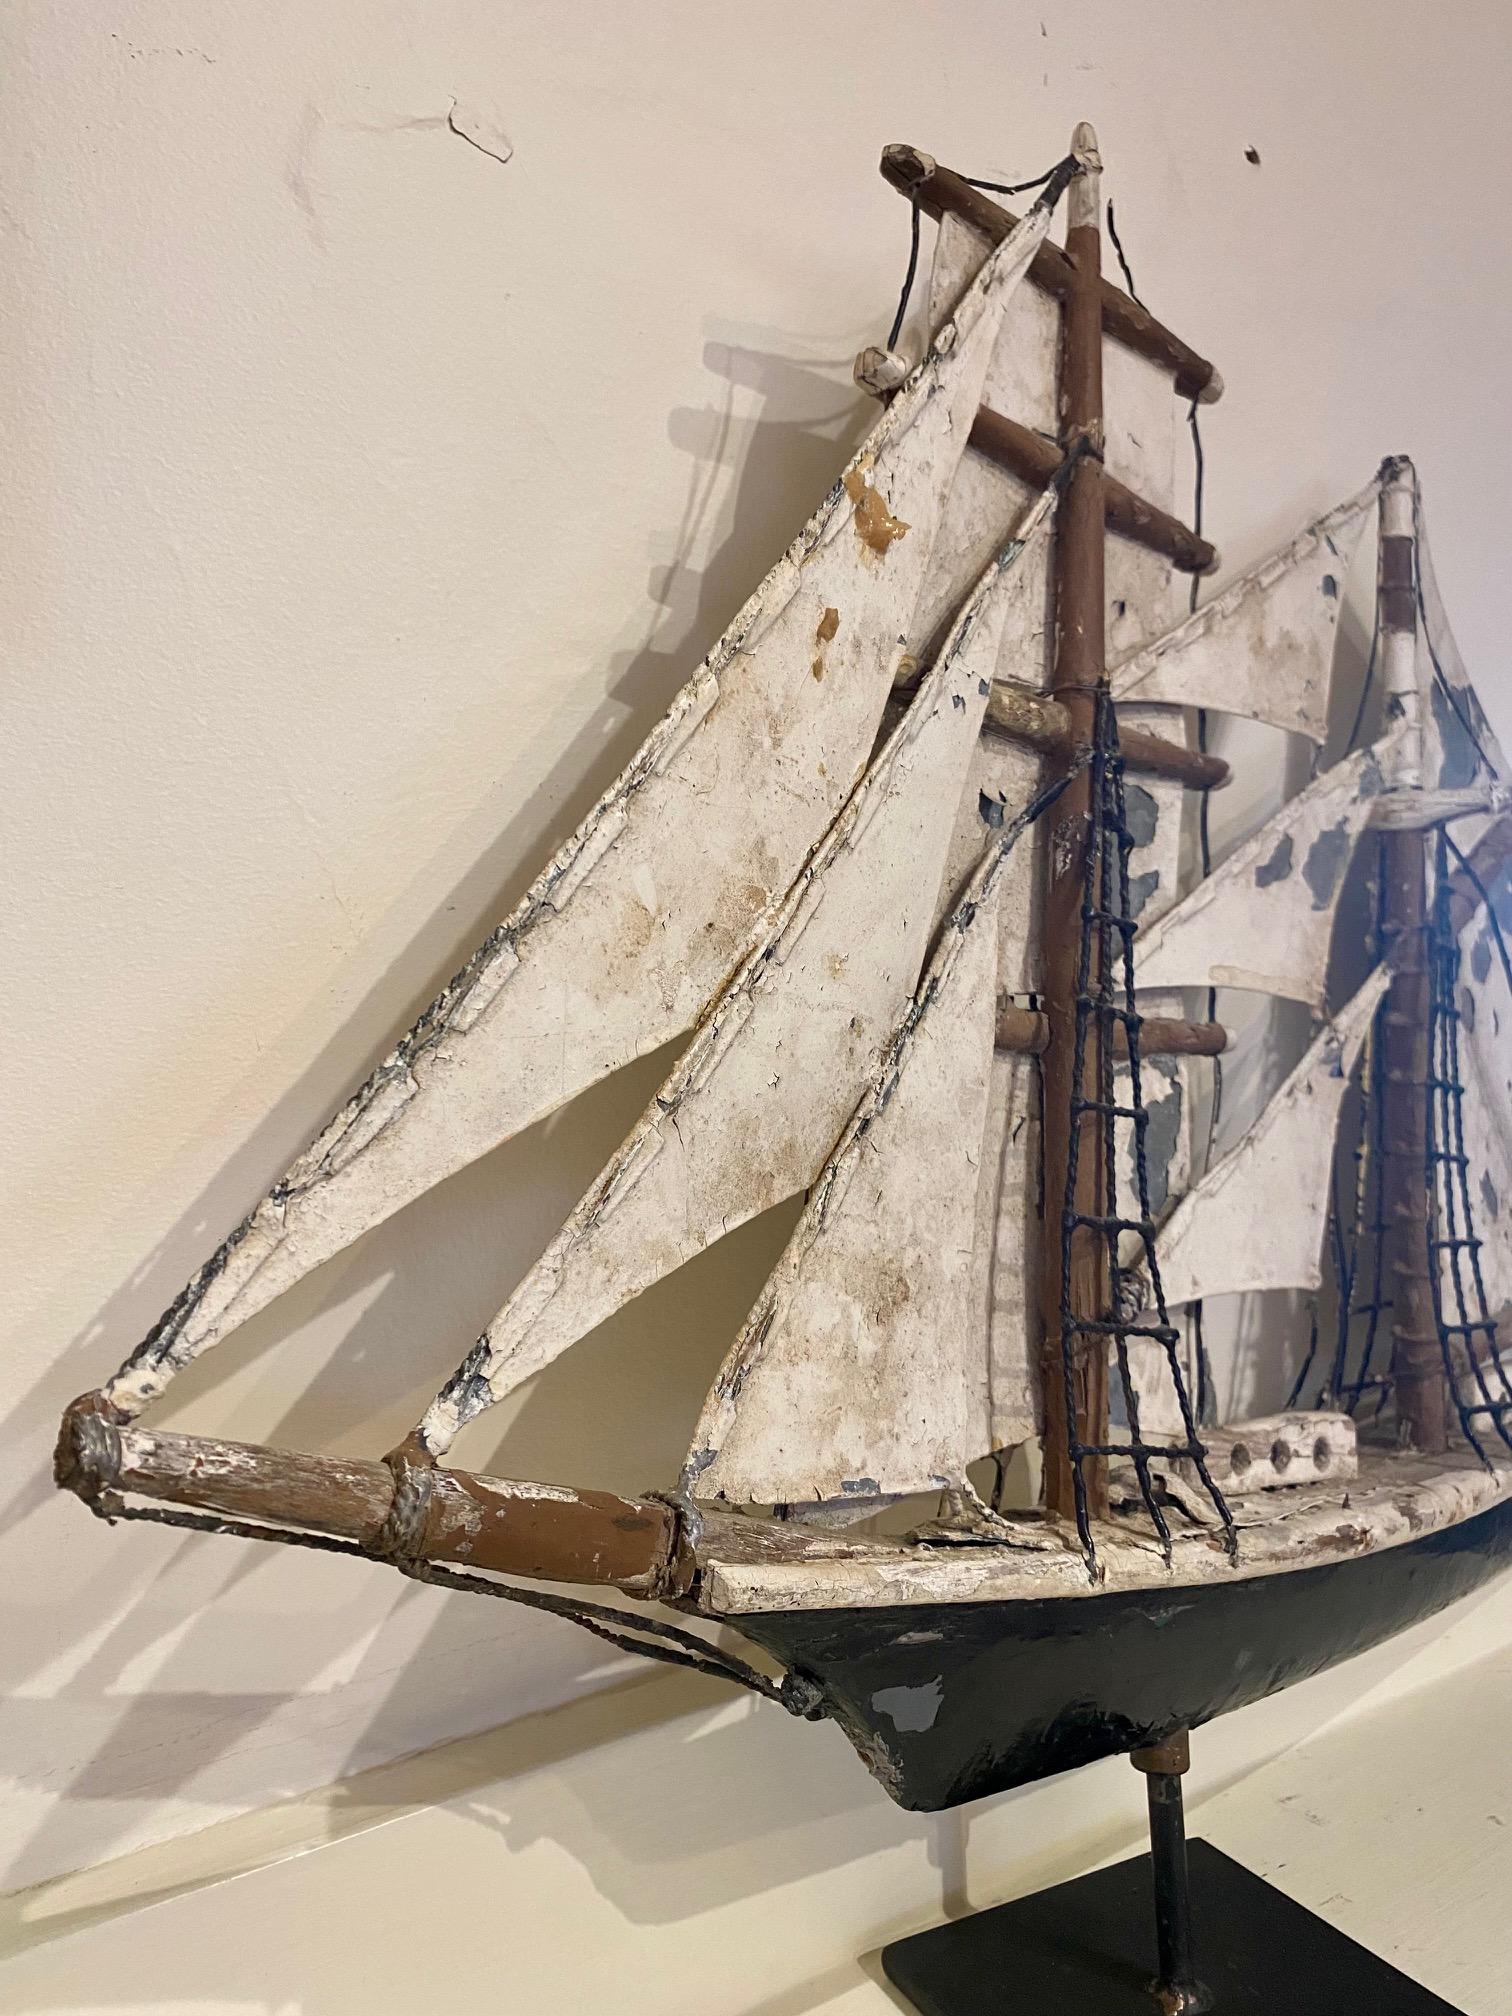 Folk Art Brigantine Weathervane by Frank Adams (1871 - 1944), West Tisbury, Martha's Vineyard, circa 1930s, a hand built weathervane of a brigantine with square-rigged foremast and fore-and-aft-rigged mainmast, with wooden hull, characteristic cut